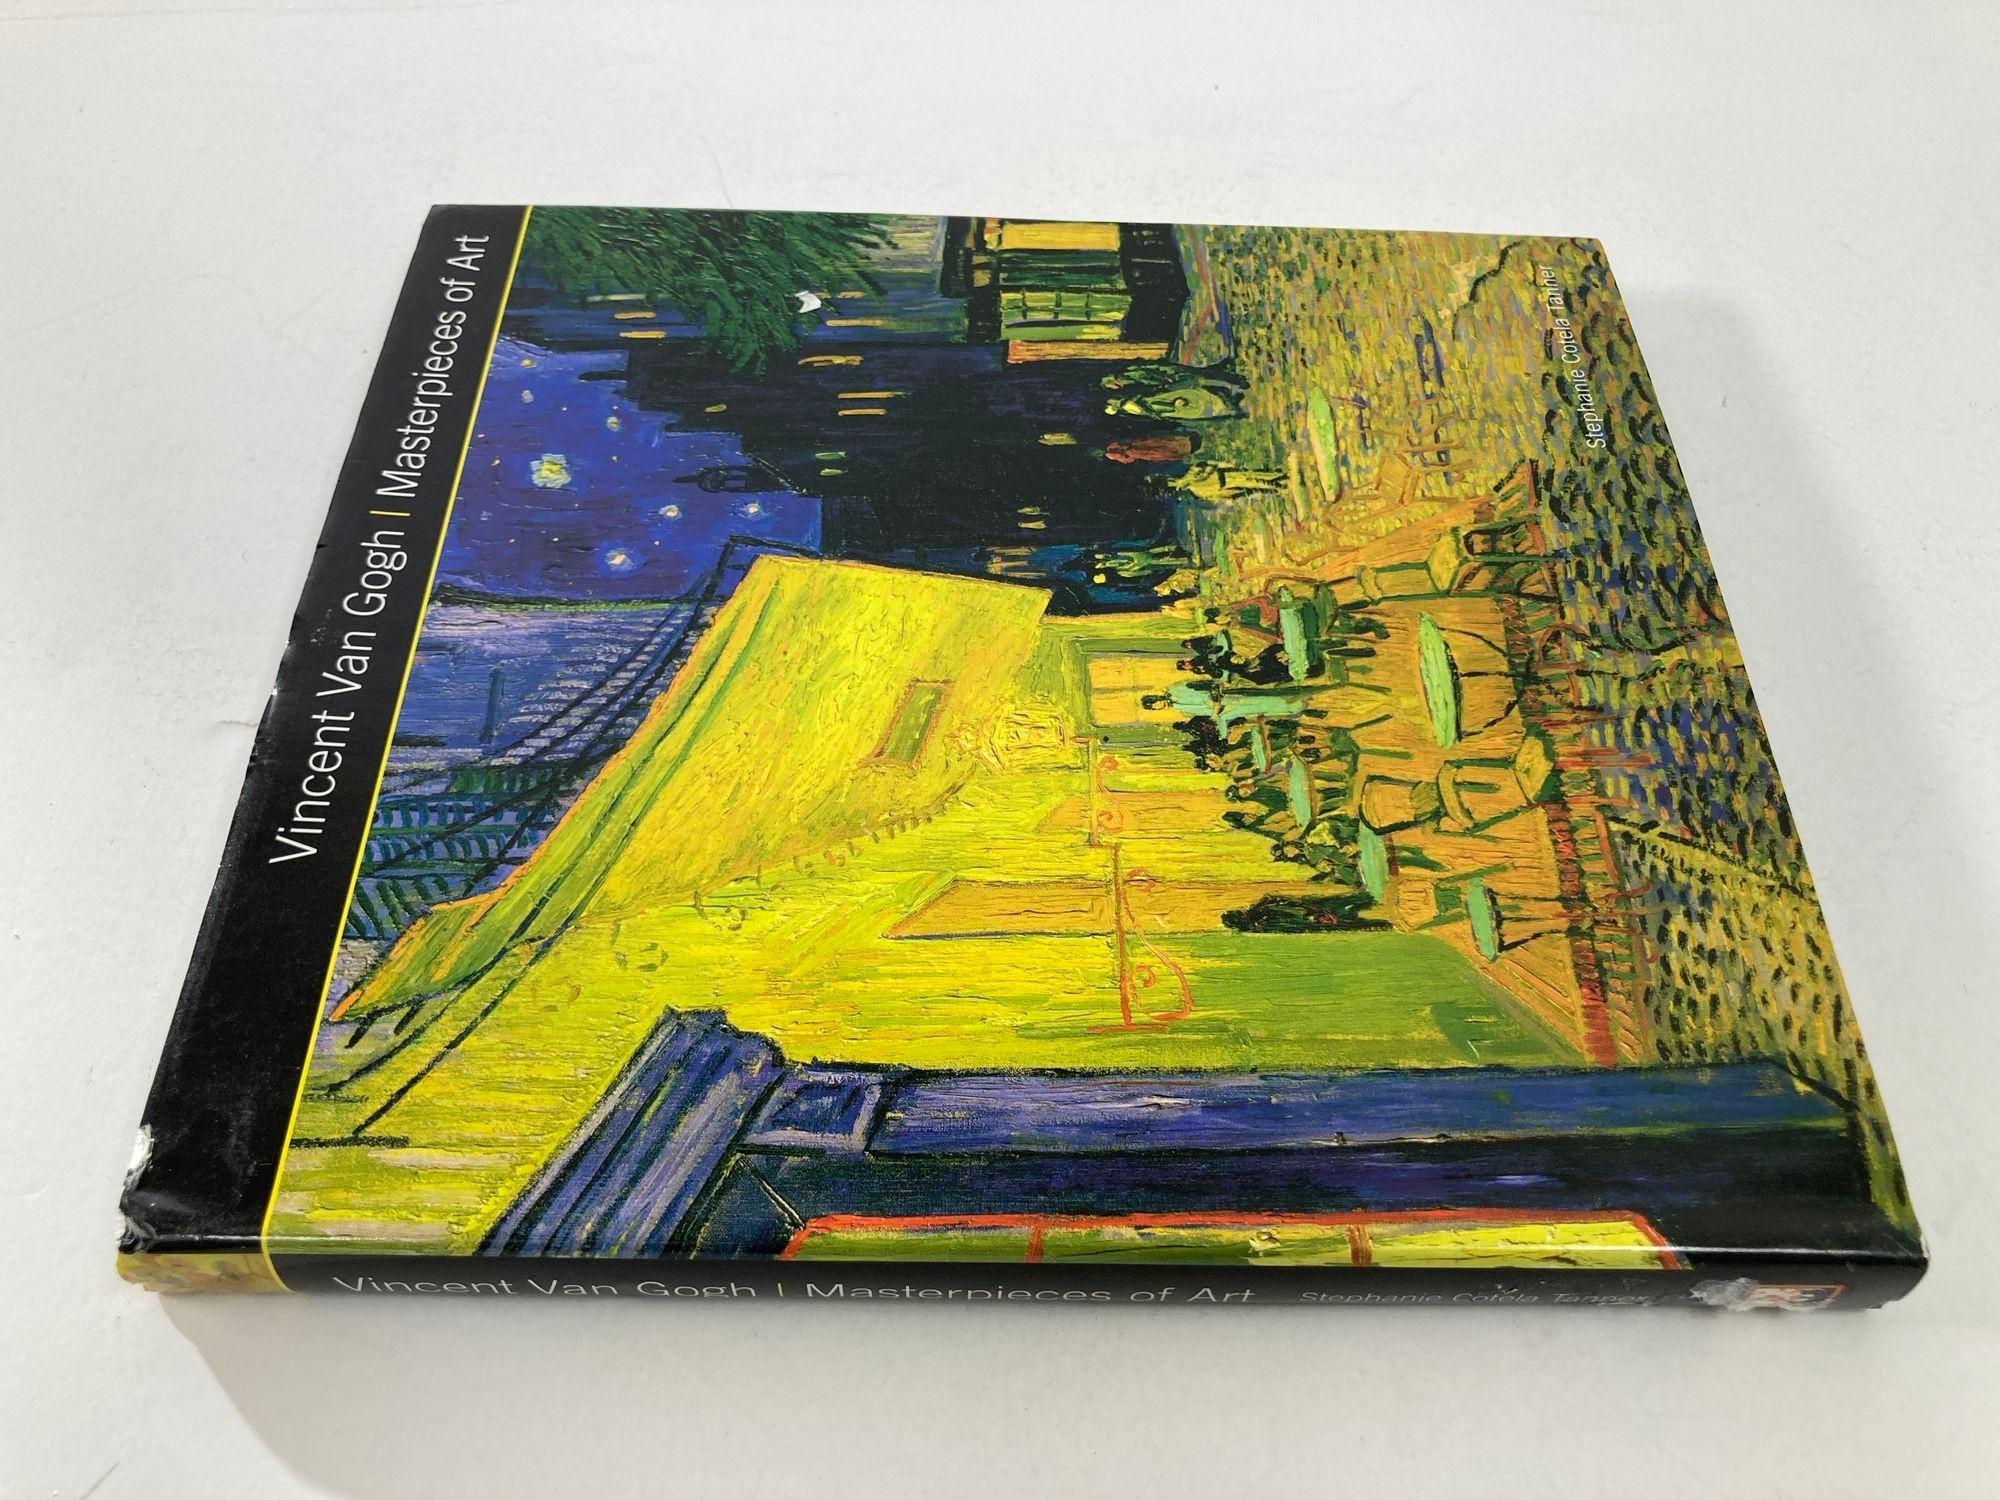 Expressionist Vincent Van Gogh Masterpieces of Art For Sale